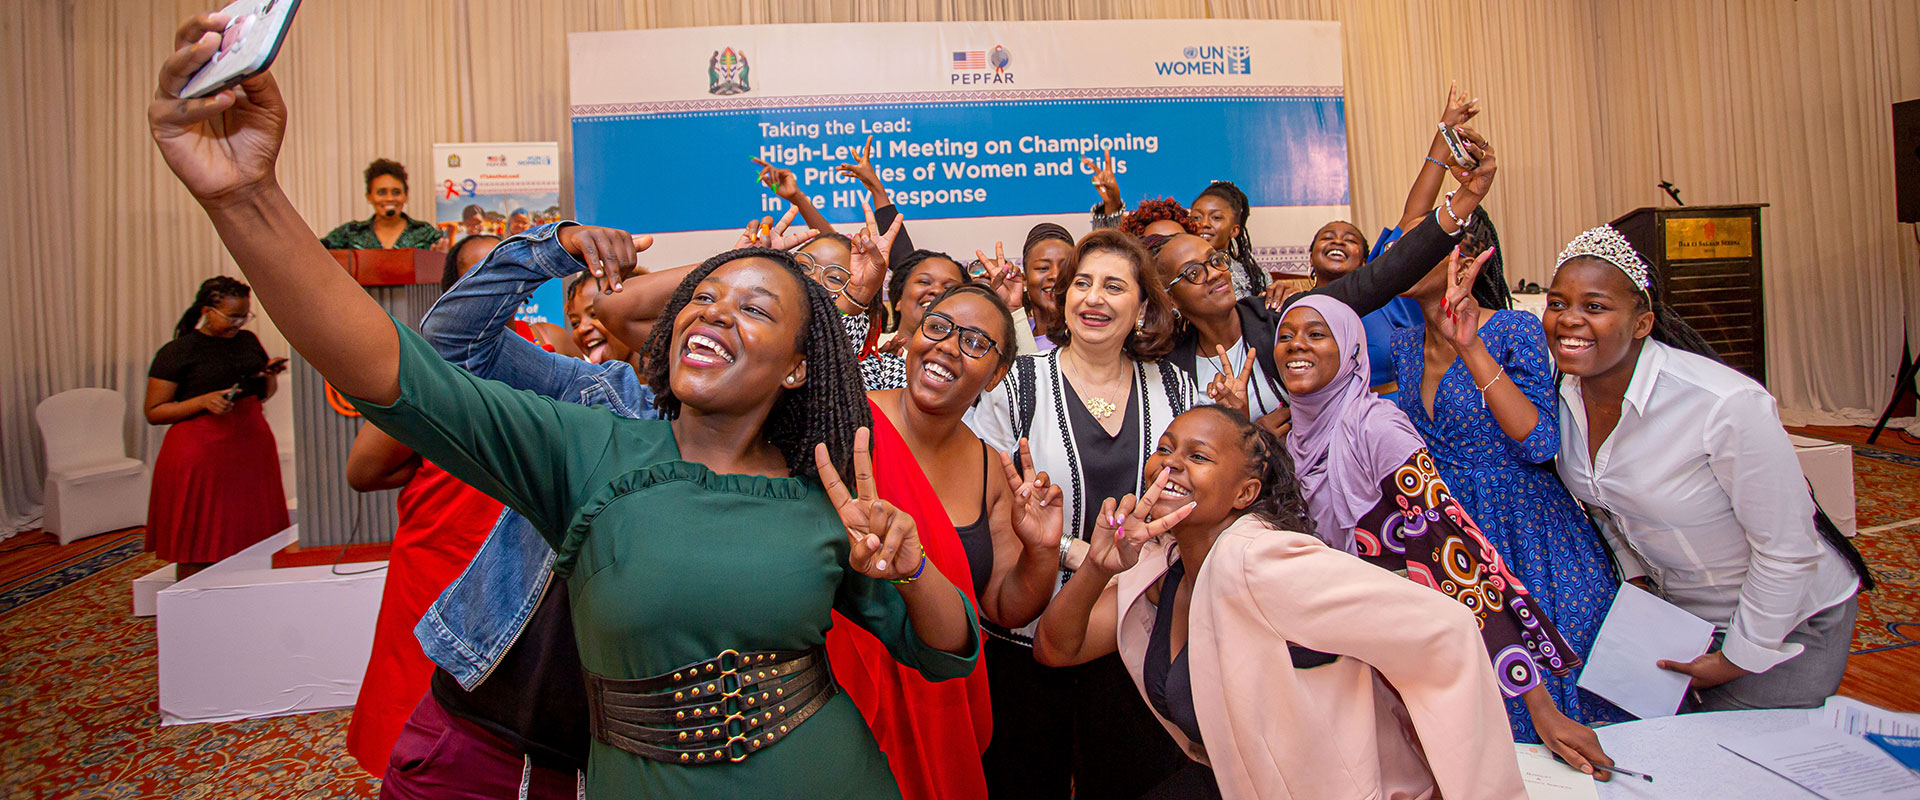 A selfie moment with emerging young leaders, beneficiaries of a UN Women programme on young women’s leadership in the HIV response. Photo: UN Women/Rashid Hamis Kindamba 